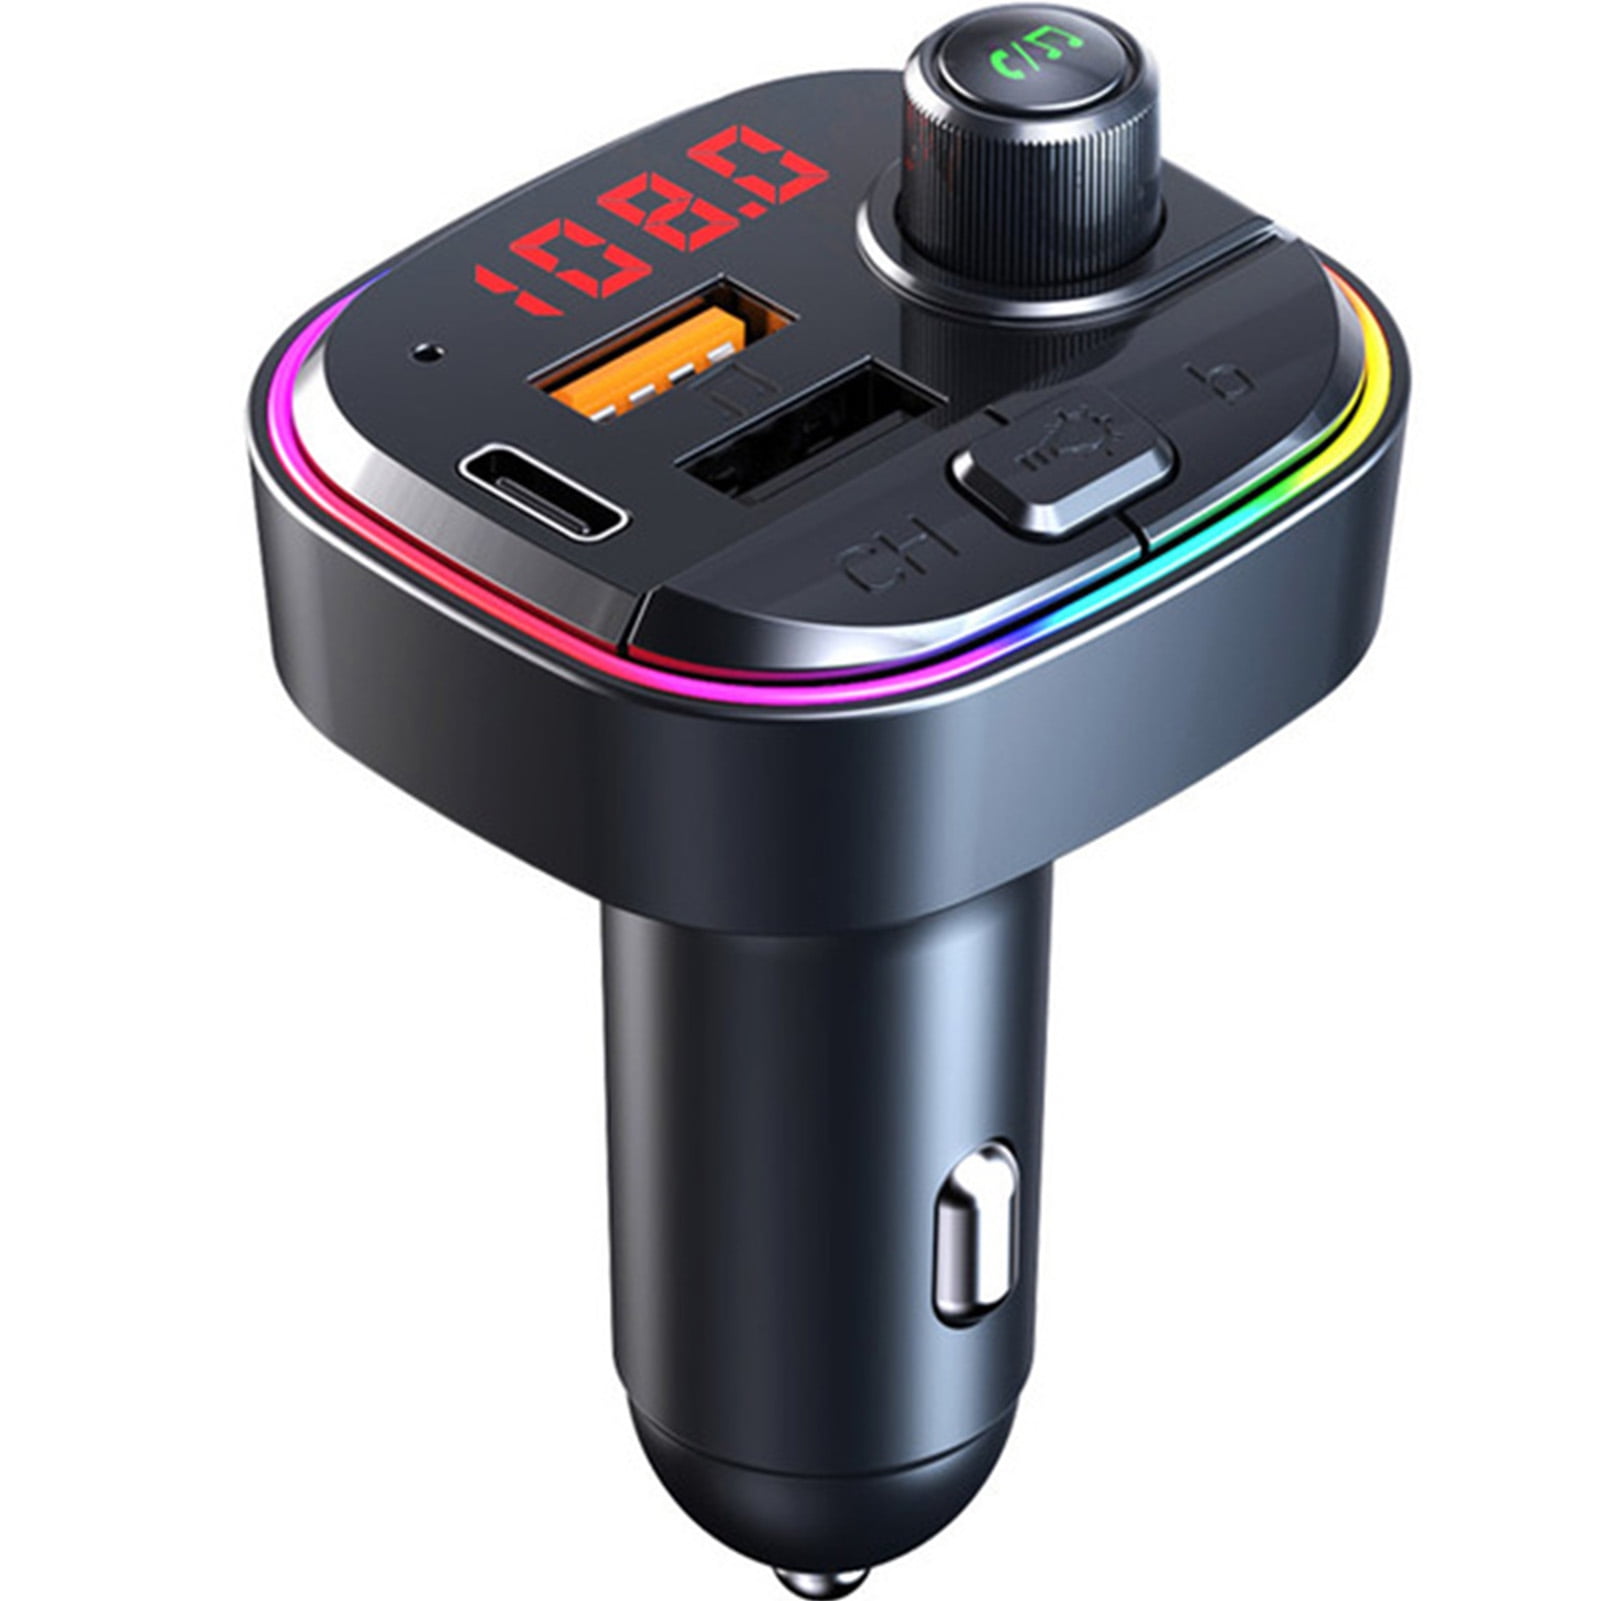 Bluetooth 5.0 FM Transmitter for Car,QC3.0&Type-C PD 18W Wireless Car Adapter/ Car Kit/ Music Player with 7 Colors Backlit,3 USB Ports Char-ger,Support U Disk Walmart.com